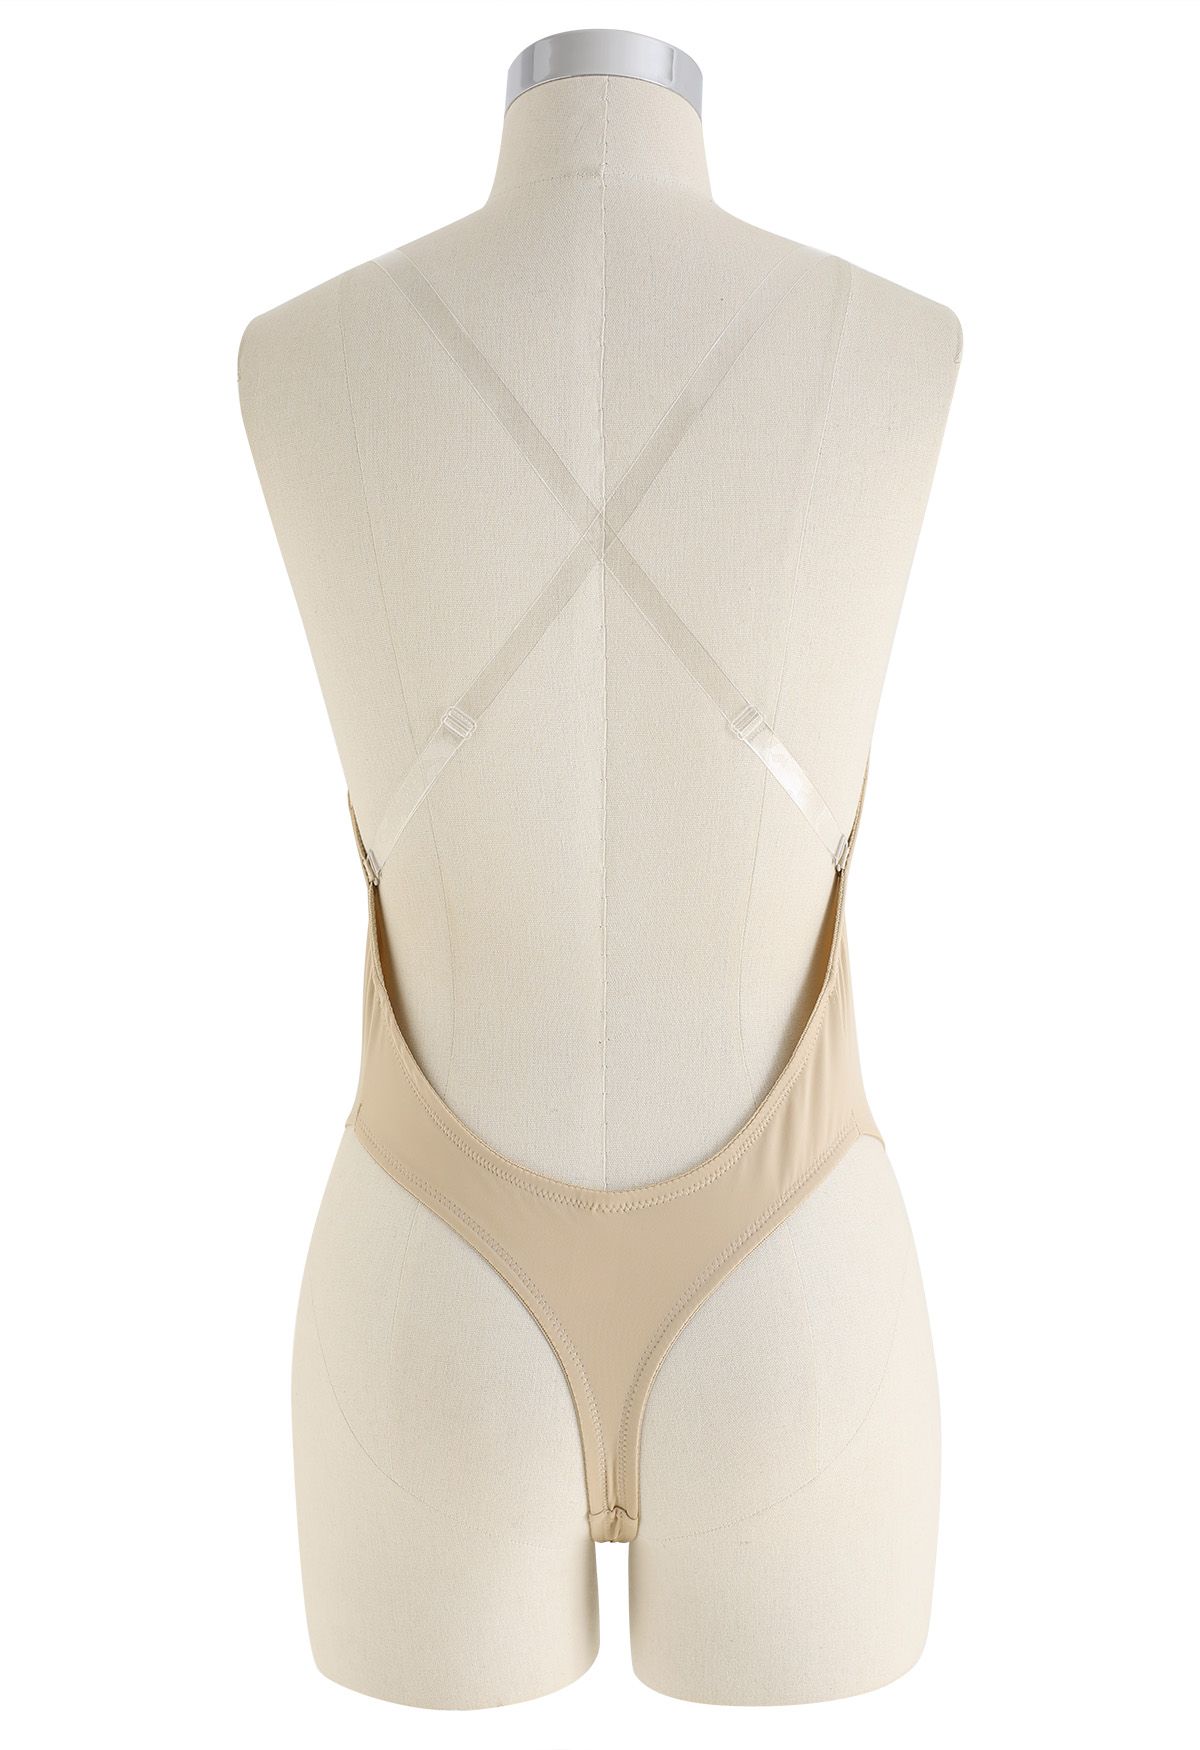 Cutout Front Low Back Underwire Bodysuit in Cream